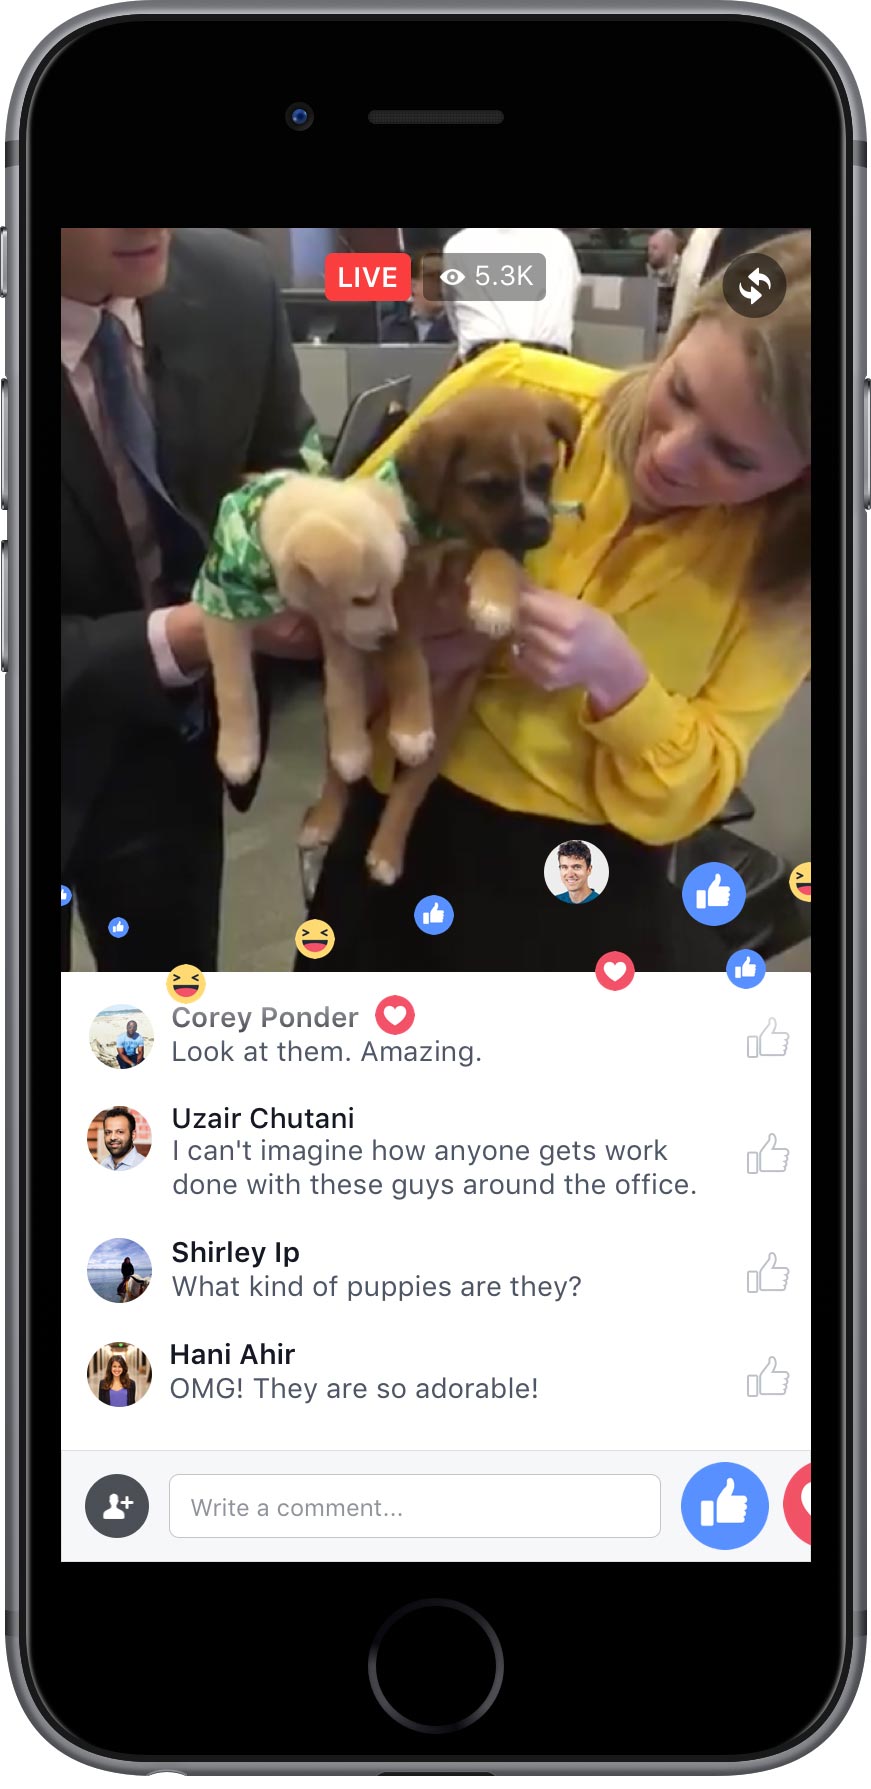 Facebook Trialling Mid-roll Video Ads on Facebook Live